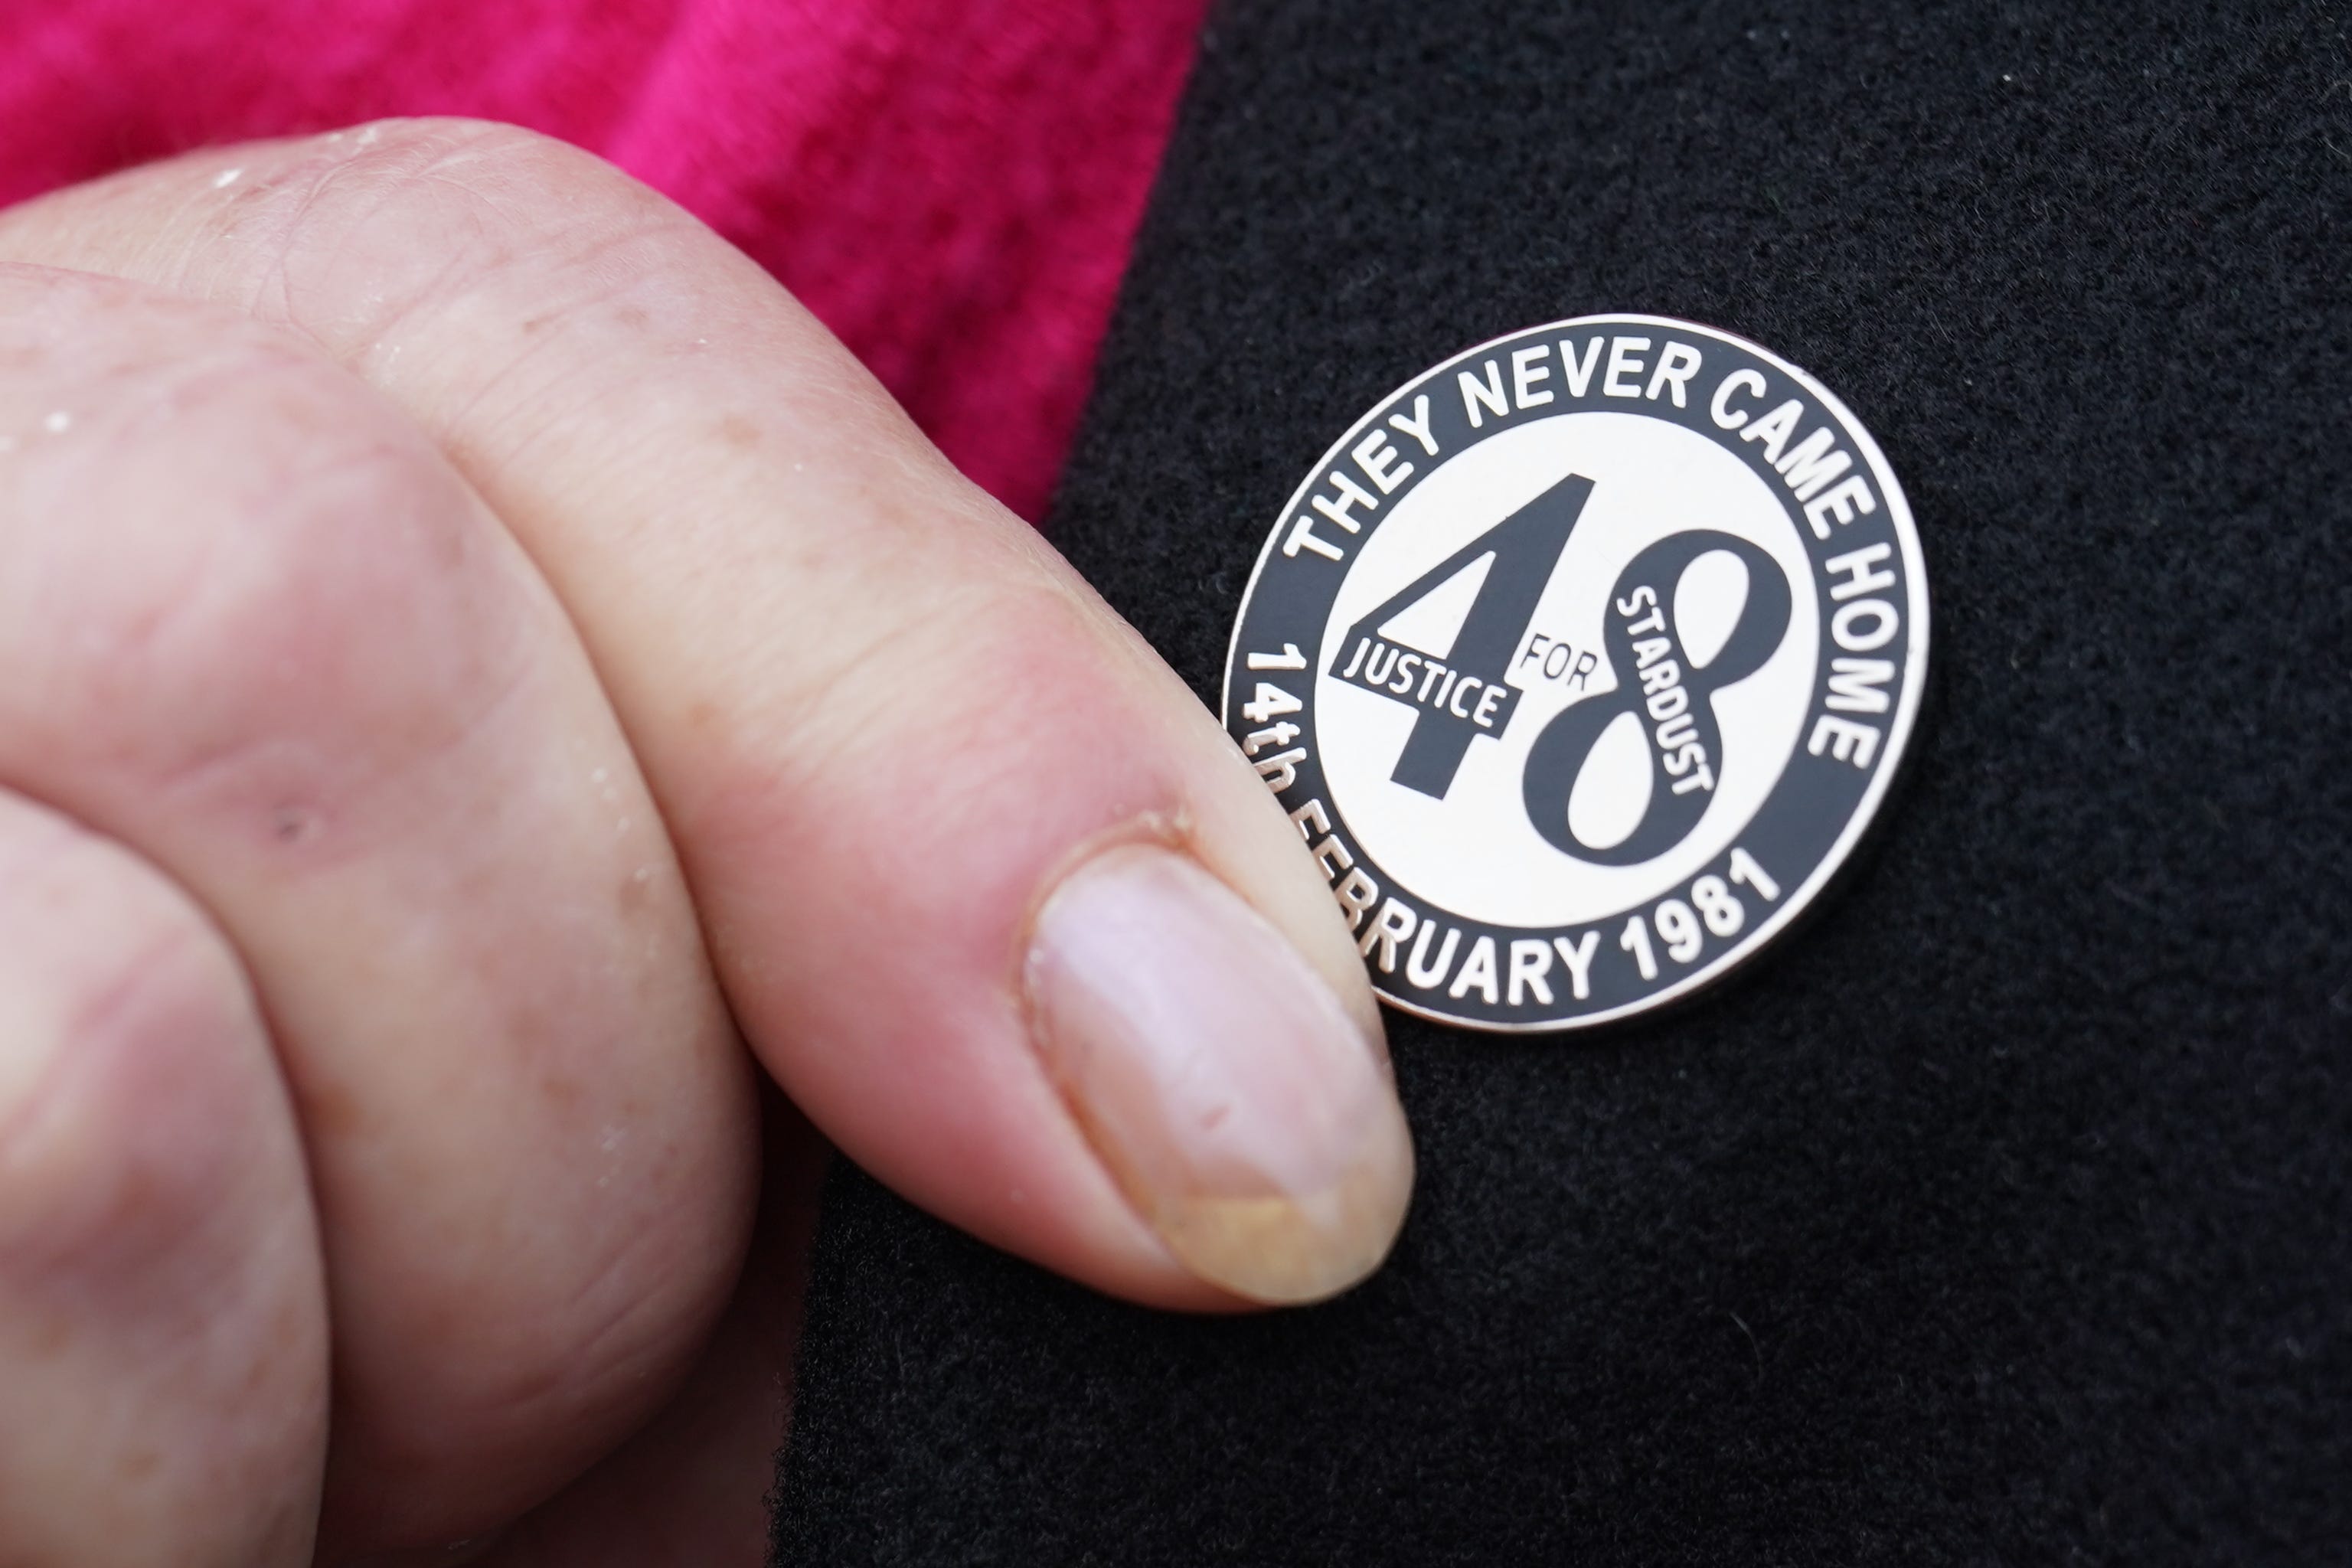 Lapel pins remember those who died